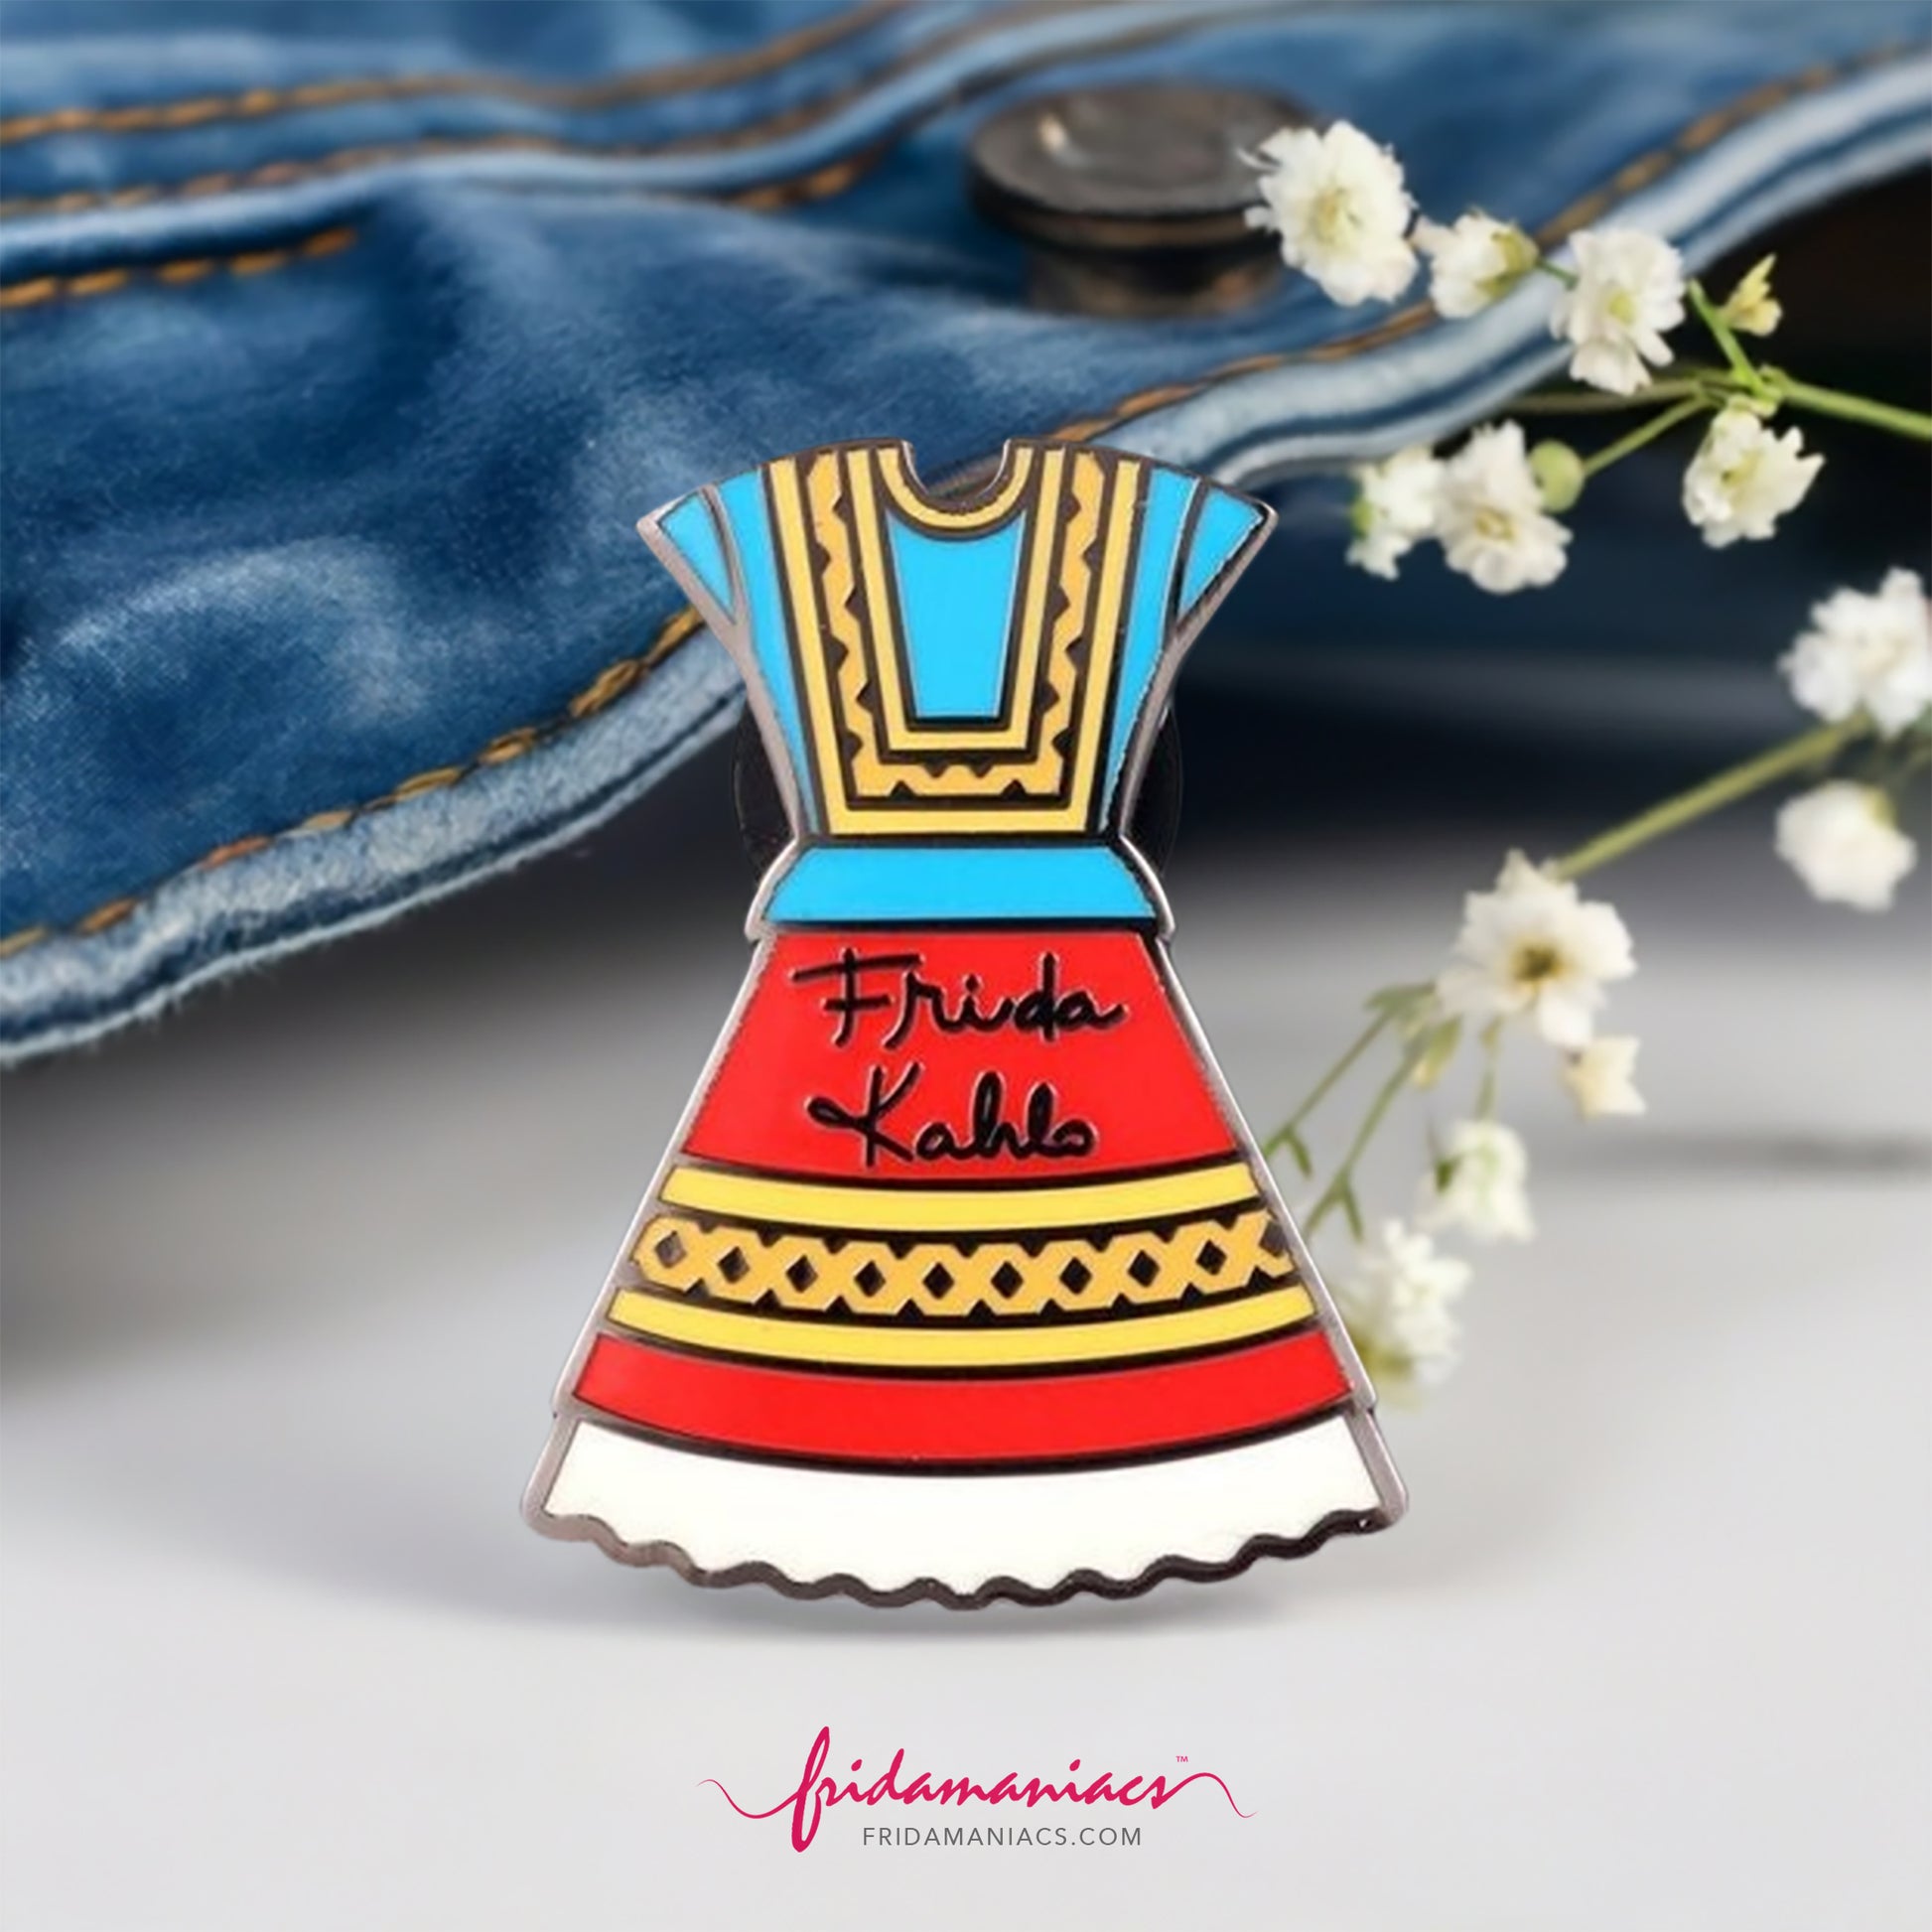 Frida Kahlo Dress Enamel Pin. Colorful red, blue, yellow, and white traditional Mexico Tehuana Oaxaca dress used by Mexican artist. With Frida Kahlo original signature on front. Cute gift idea for fridamaniacs and fridalovers.